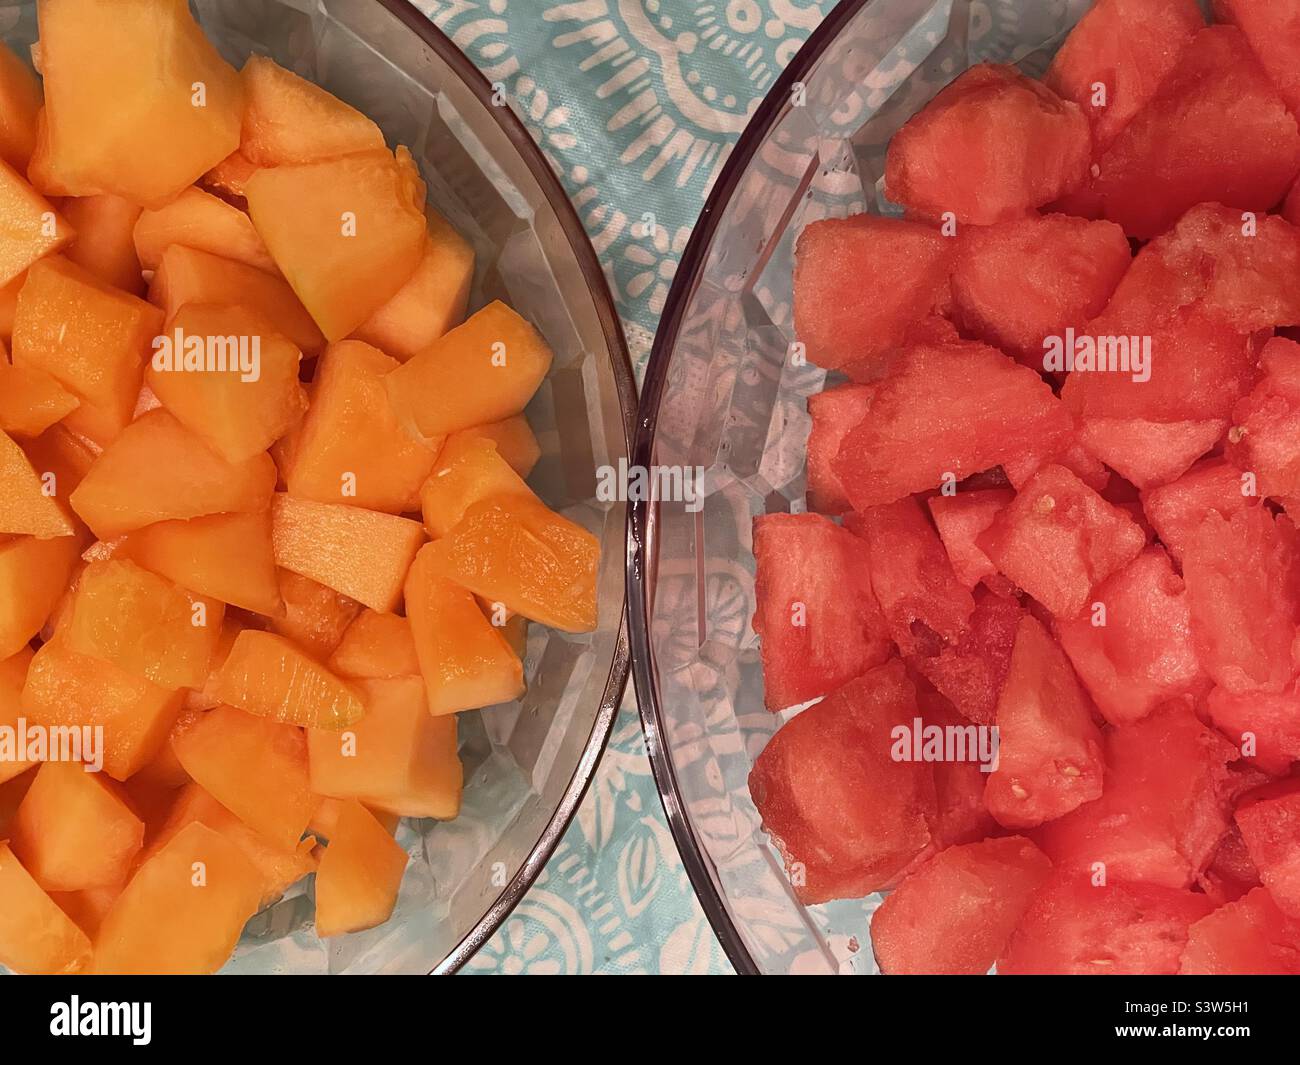 https://c8.alamy.com/comp/S3W5H1/two-large-bowls-side-by-side-sit-on-a-tabletop-filled-with-fresh-cut-fruit-one-bowl-holds-delicious-cantaloupe-and-the-other-juicy-watermelon-natural-organic-colors-of-orange-and-red-S3W5H1.jpg